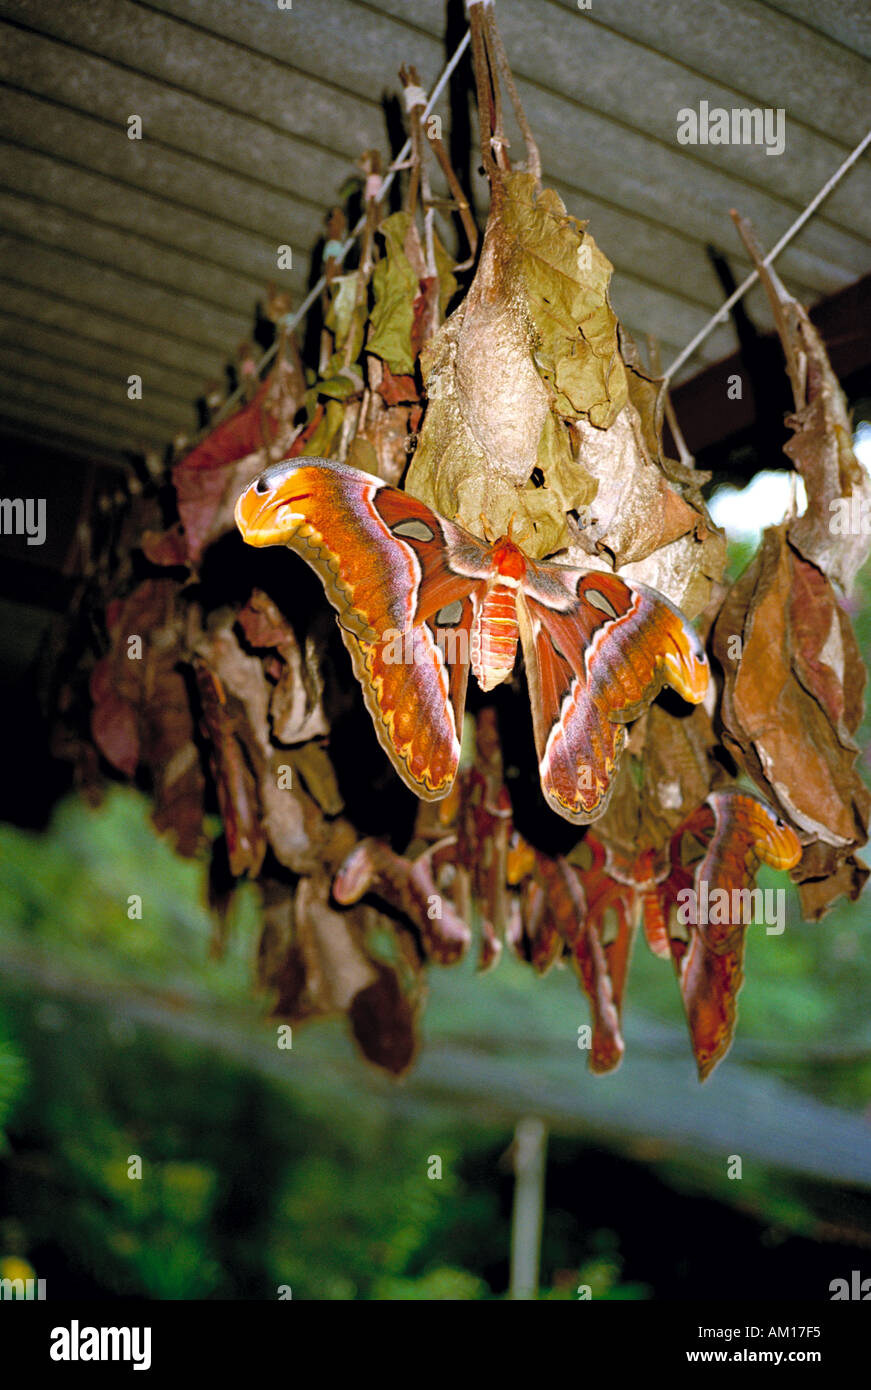 The Atlas Moth is the largest moth in the world. Many examples with cocoons here in the Butterfly Garden, Koh Samui, Thailand Stock Photo